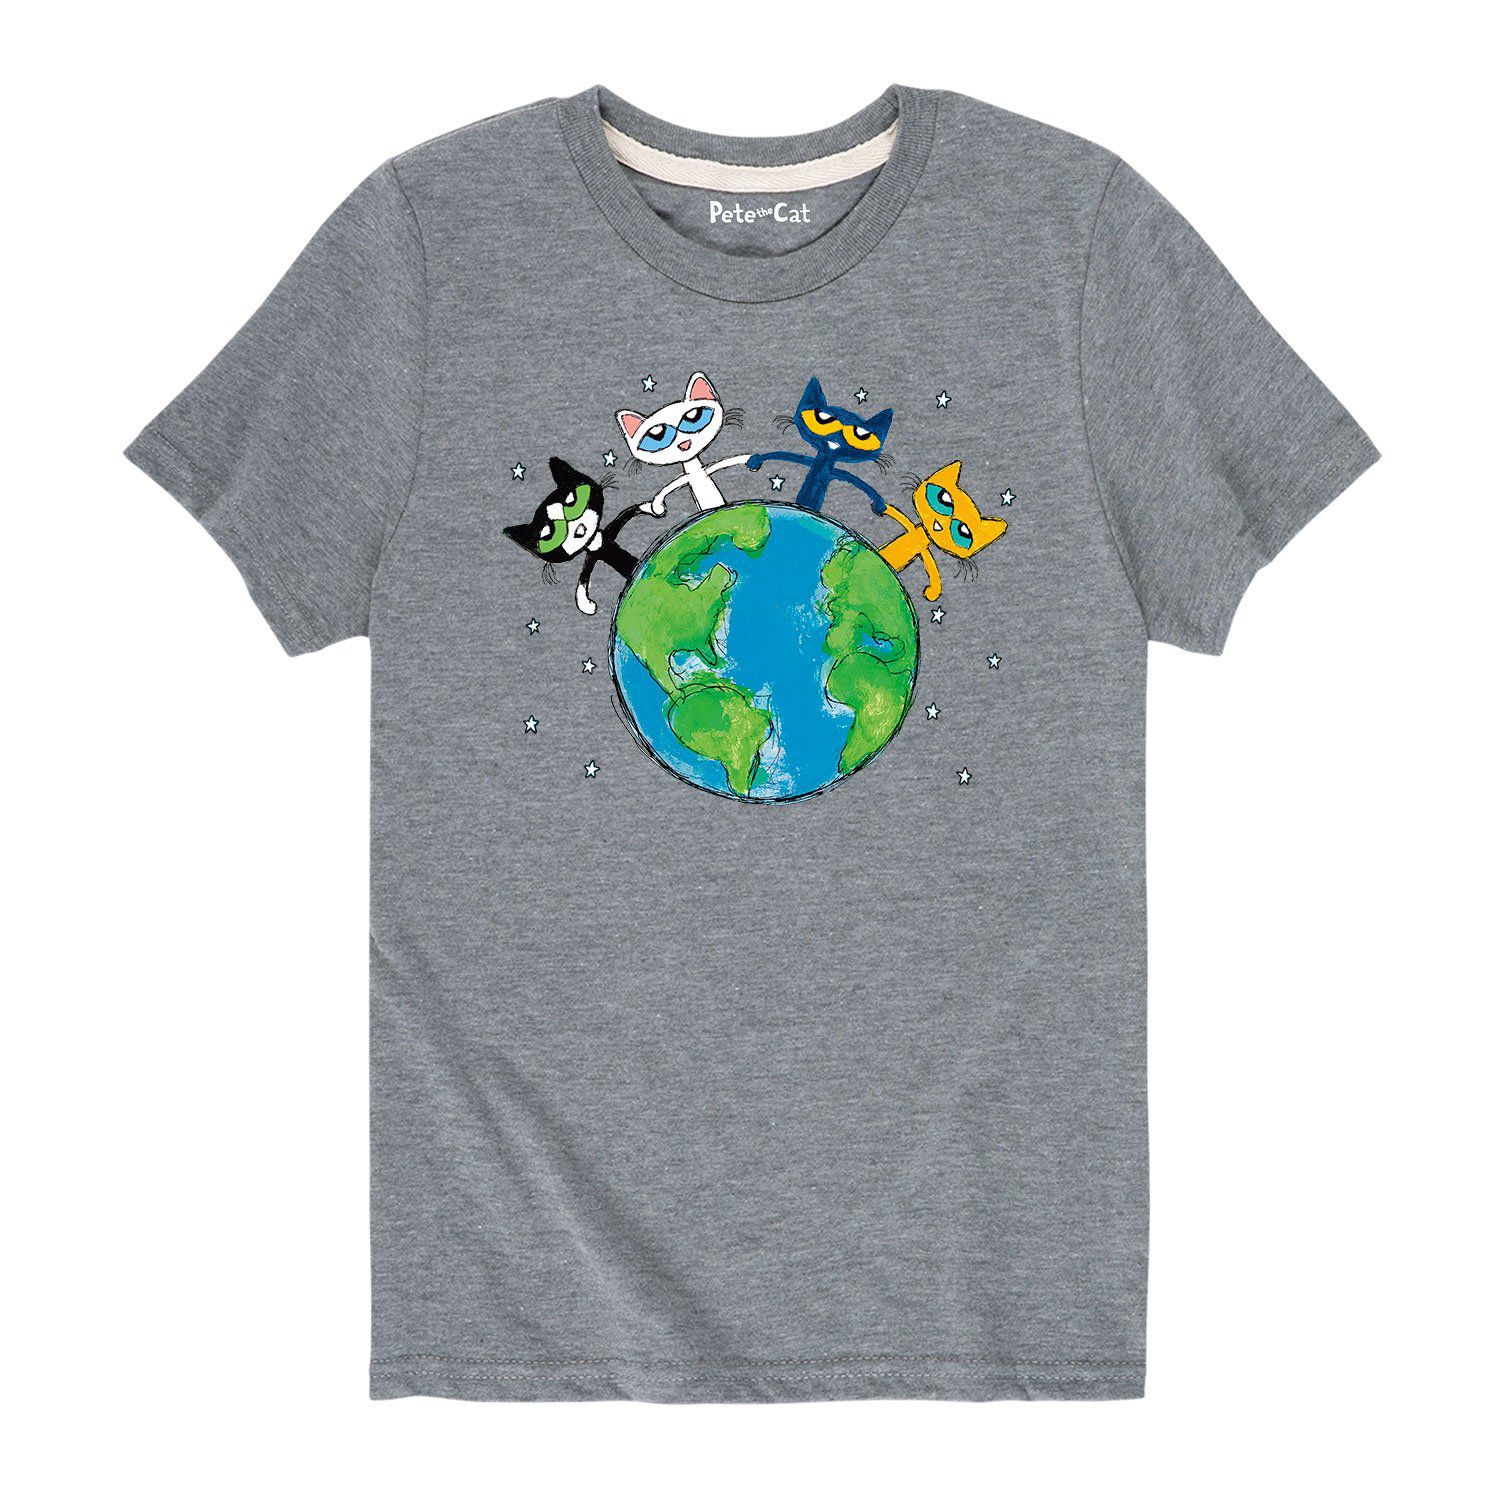 Peter's 20 20 20. Element Snoopy Earth collection.